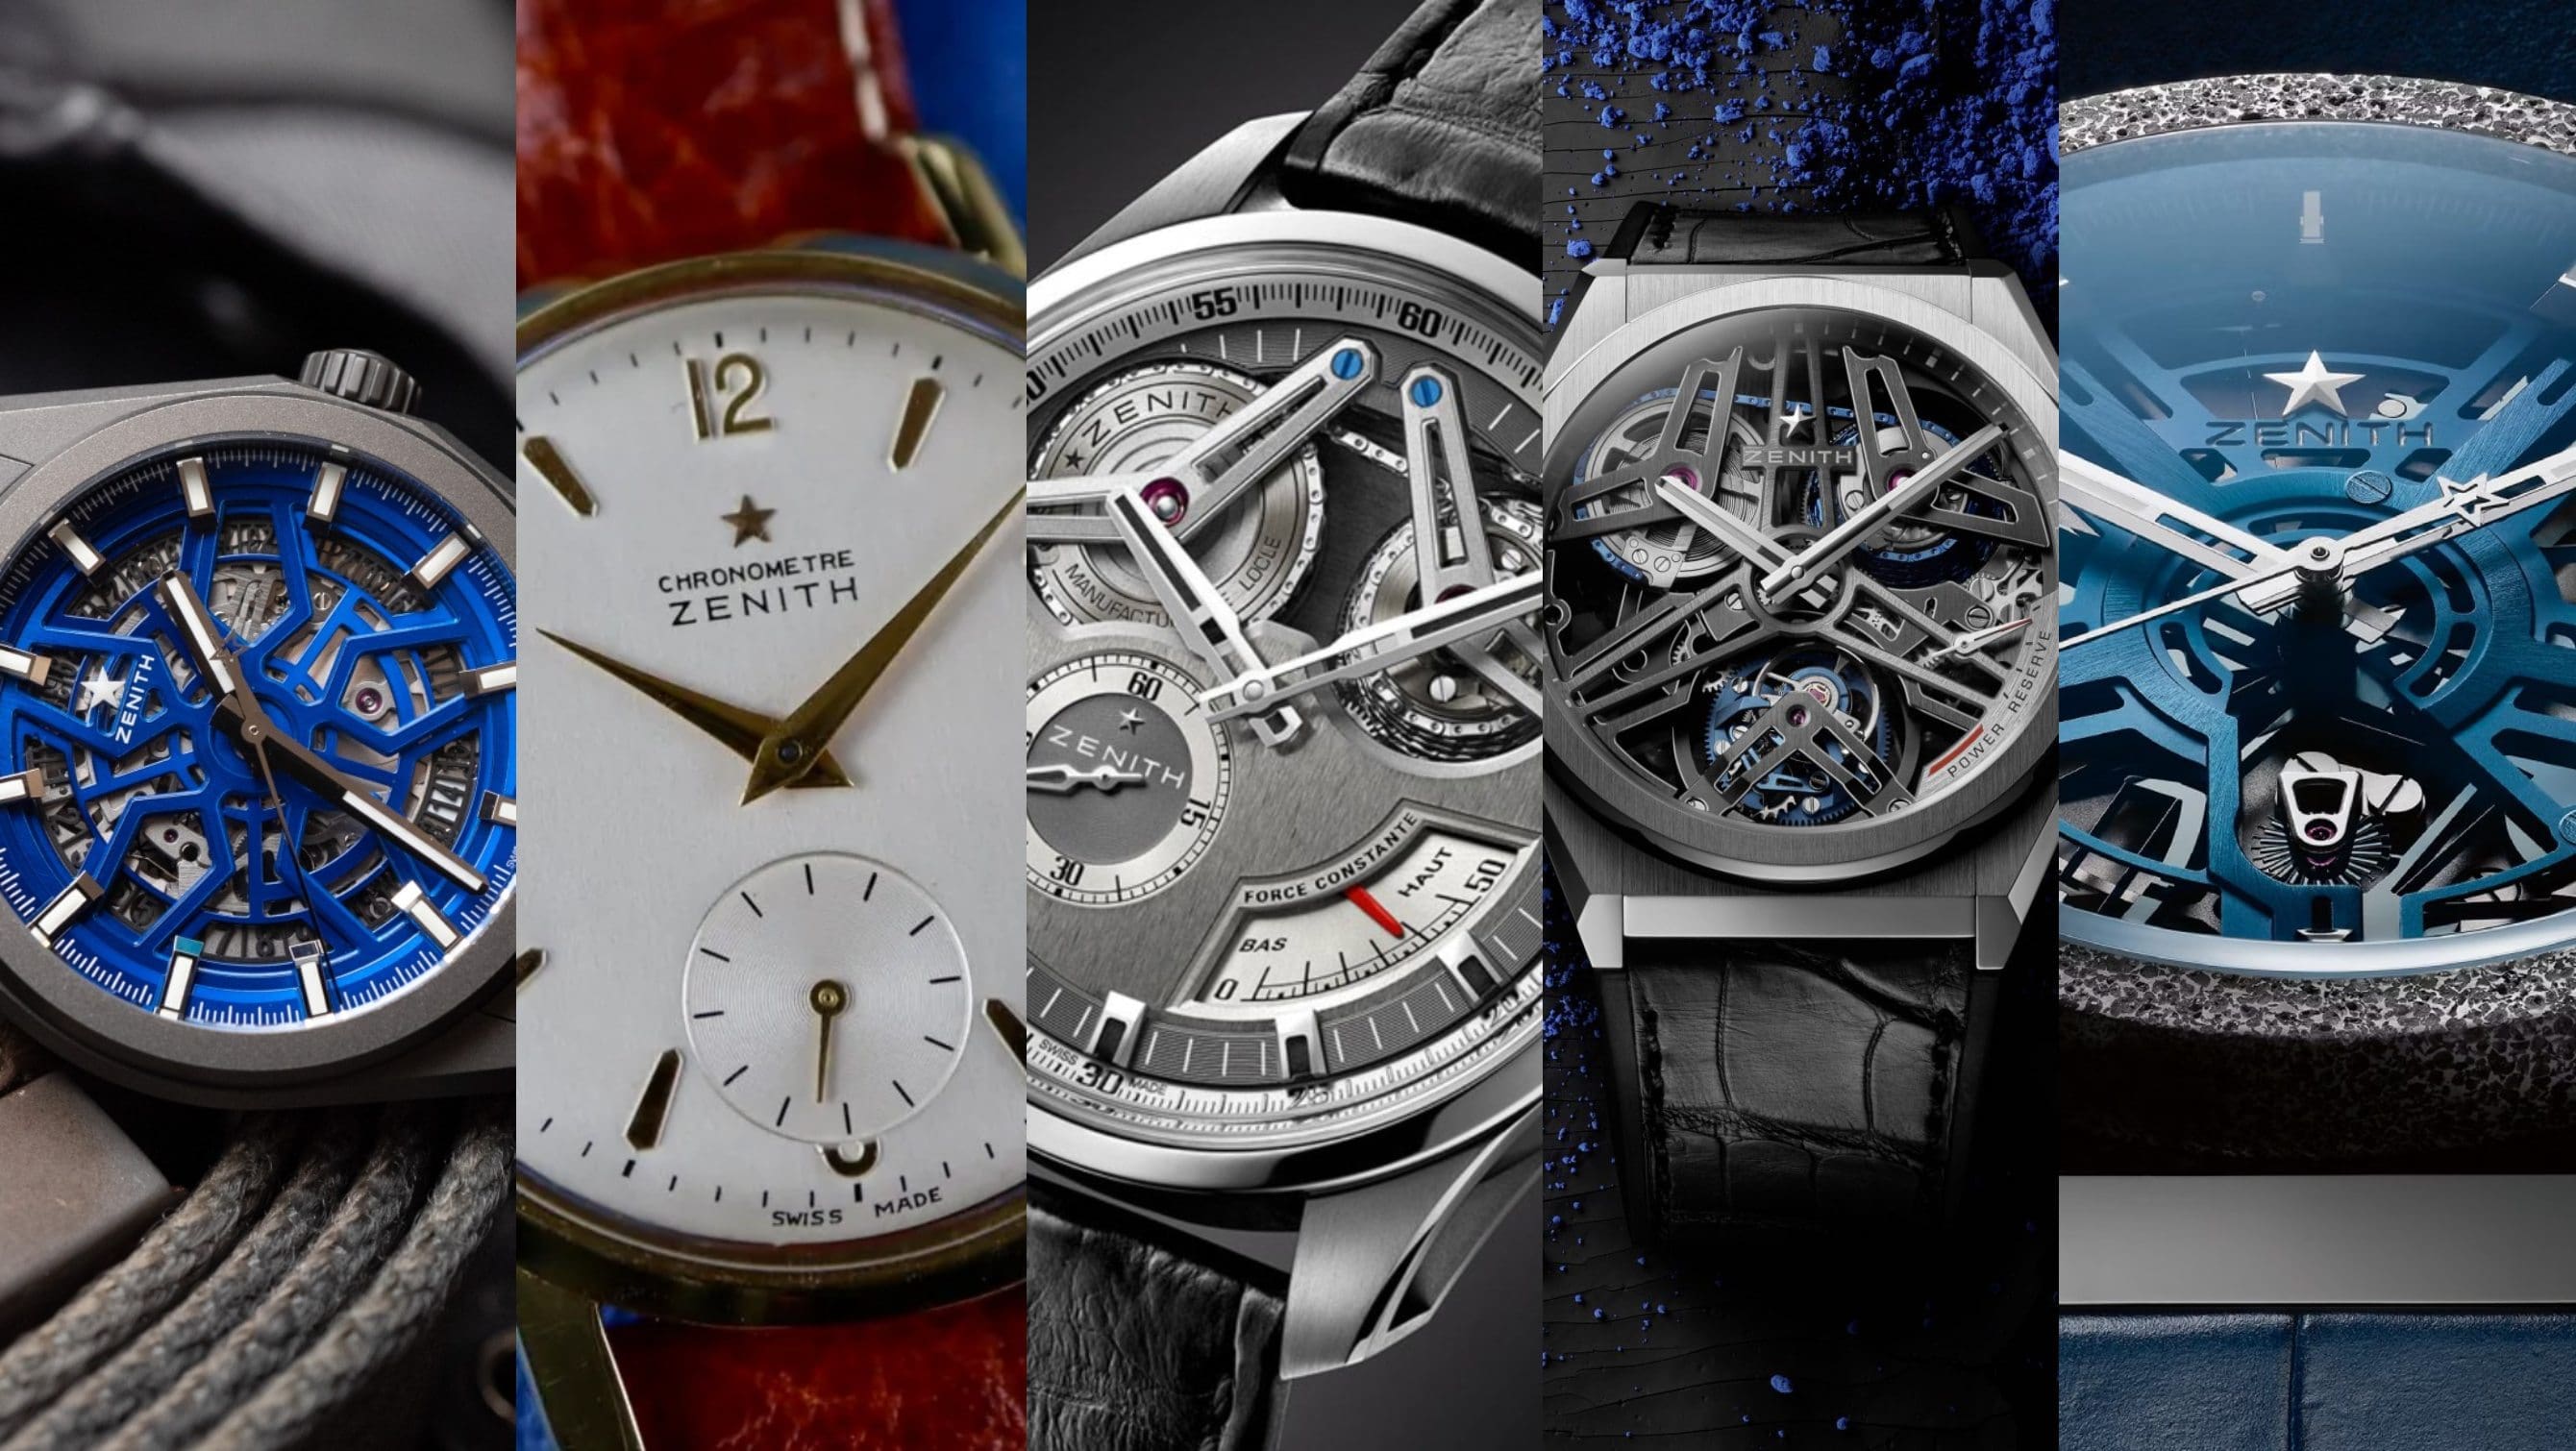 The 5 most underrated Zenith watches